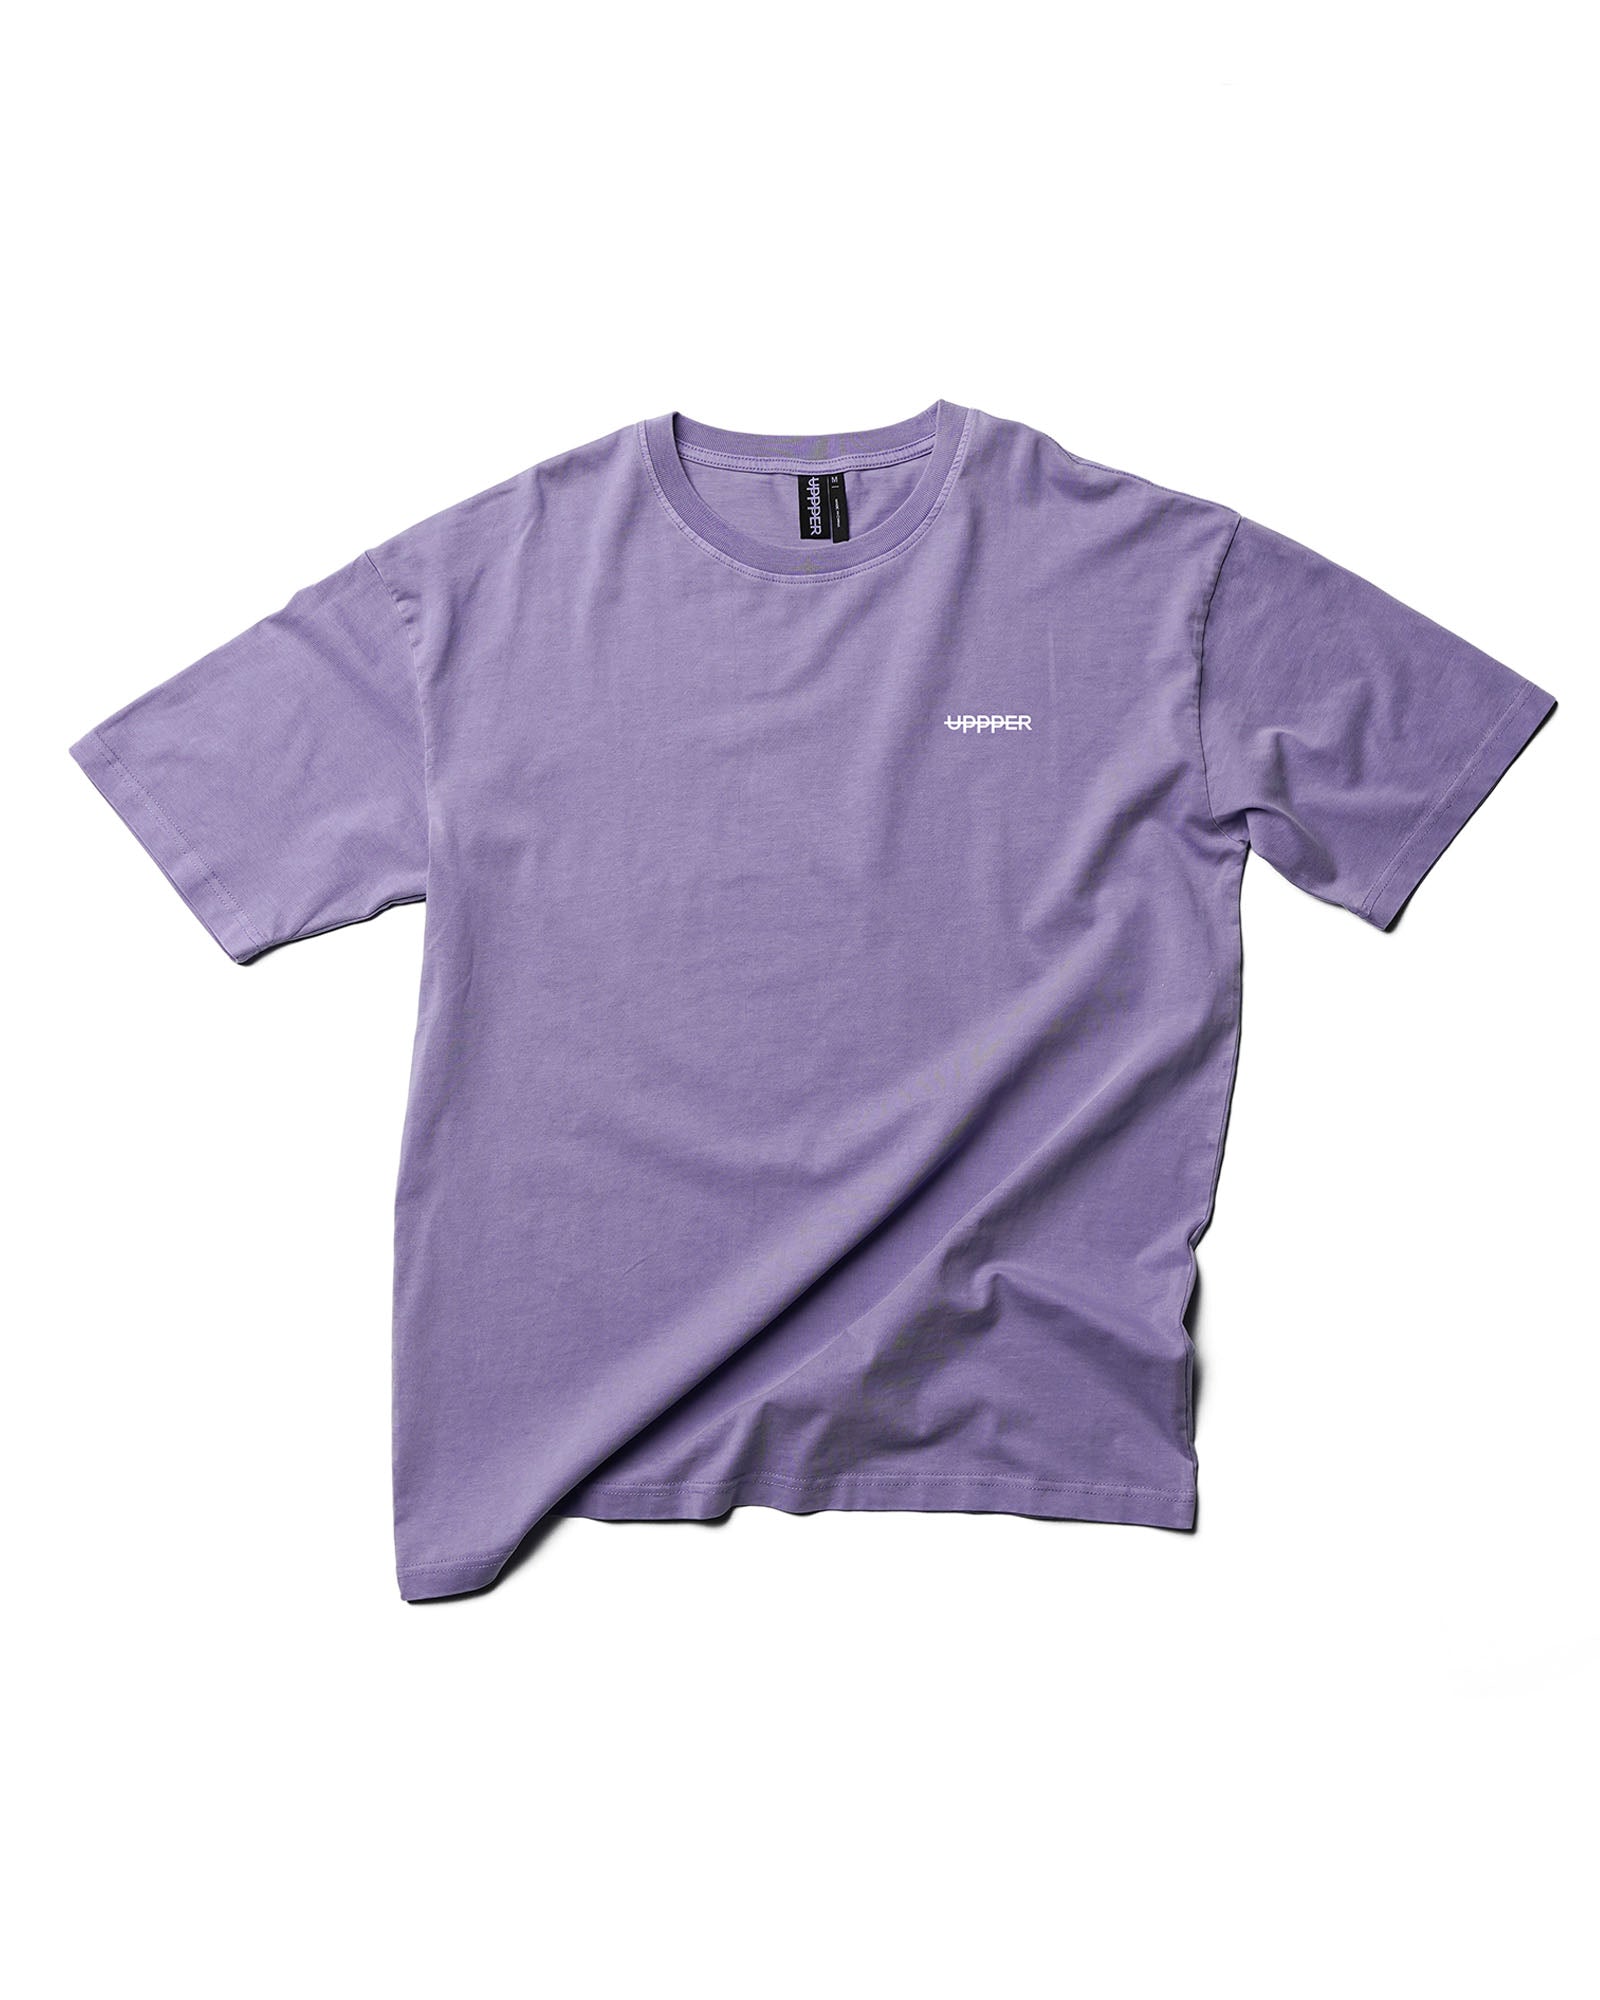 uppper t-shirt wsy lavender (front)